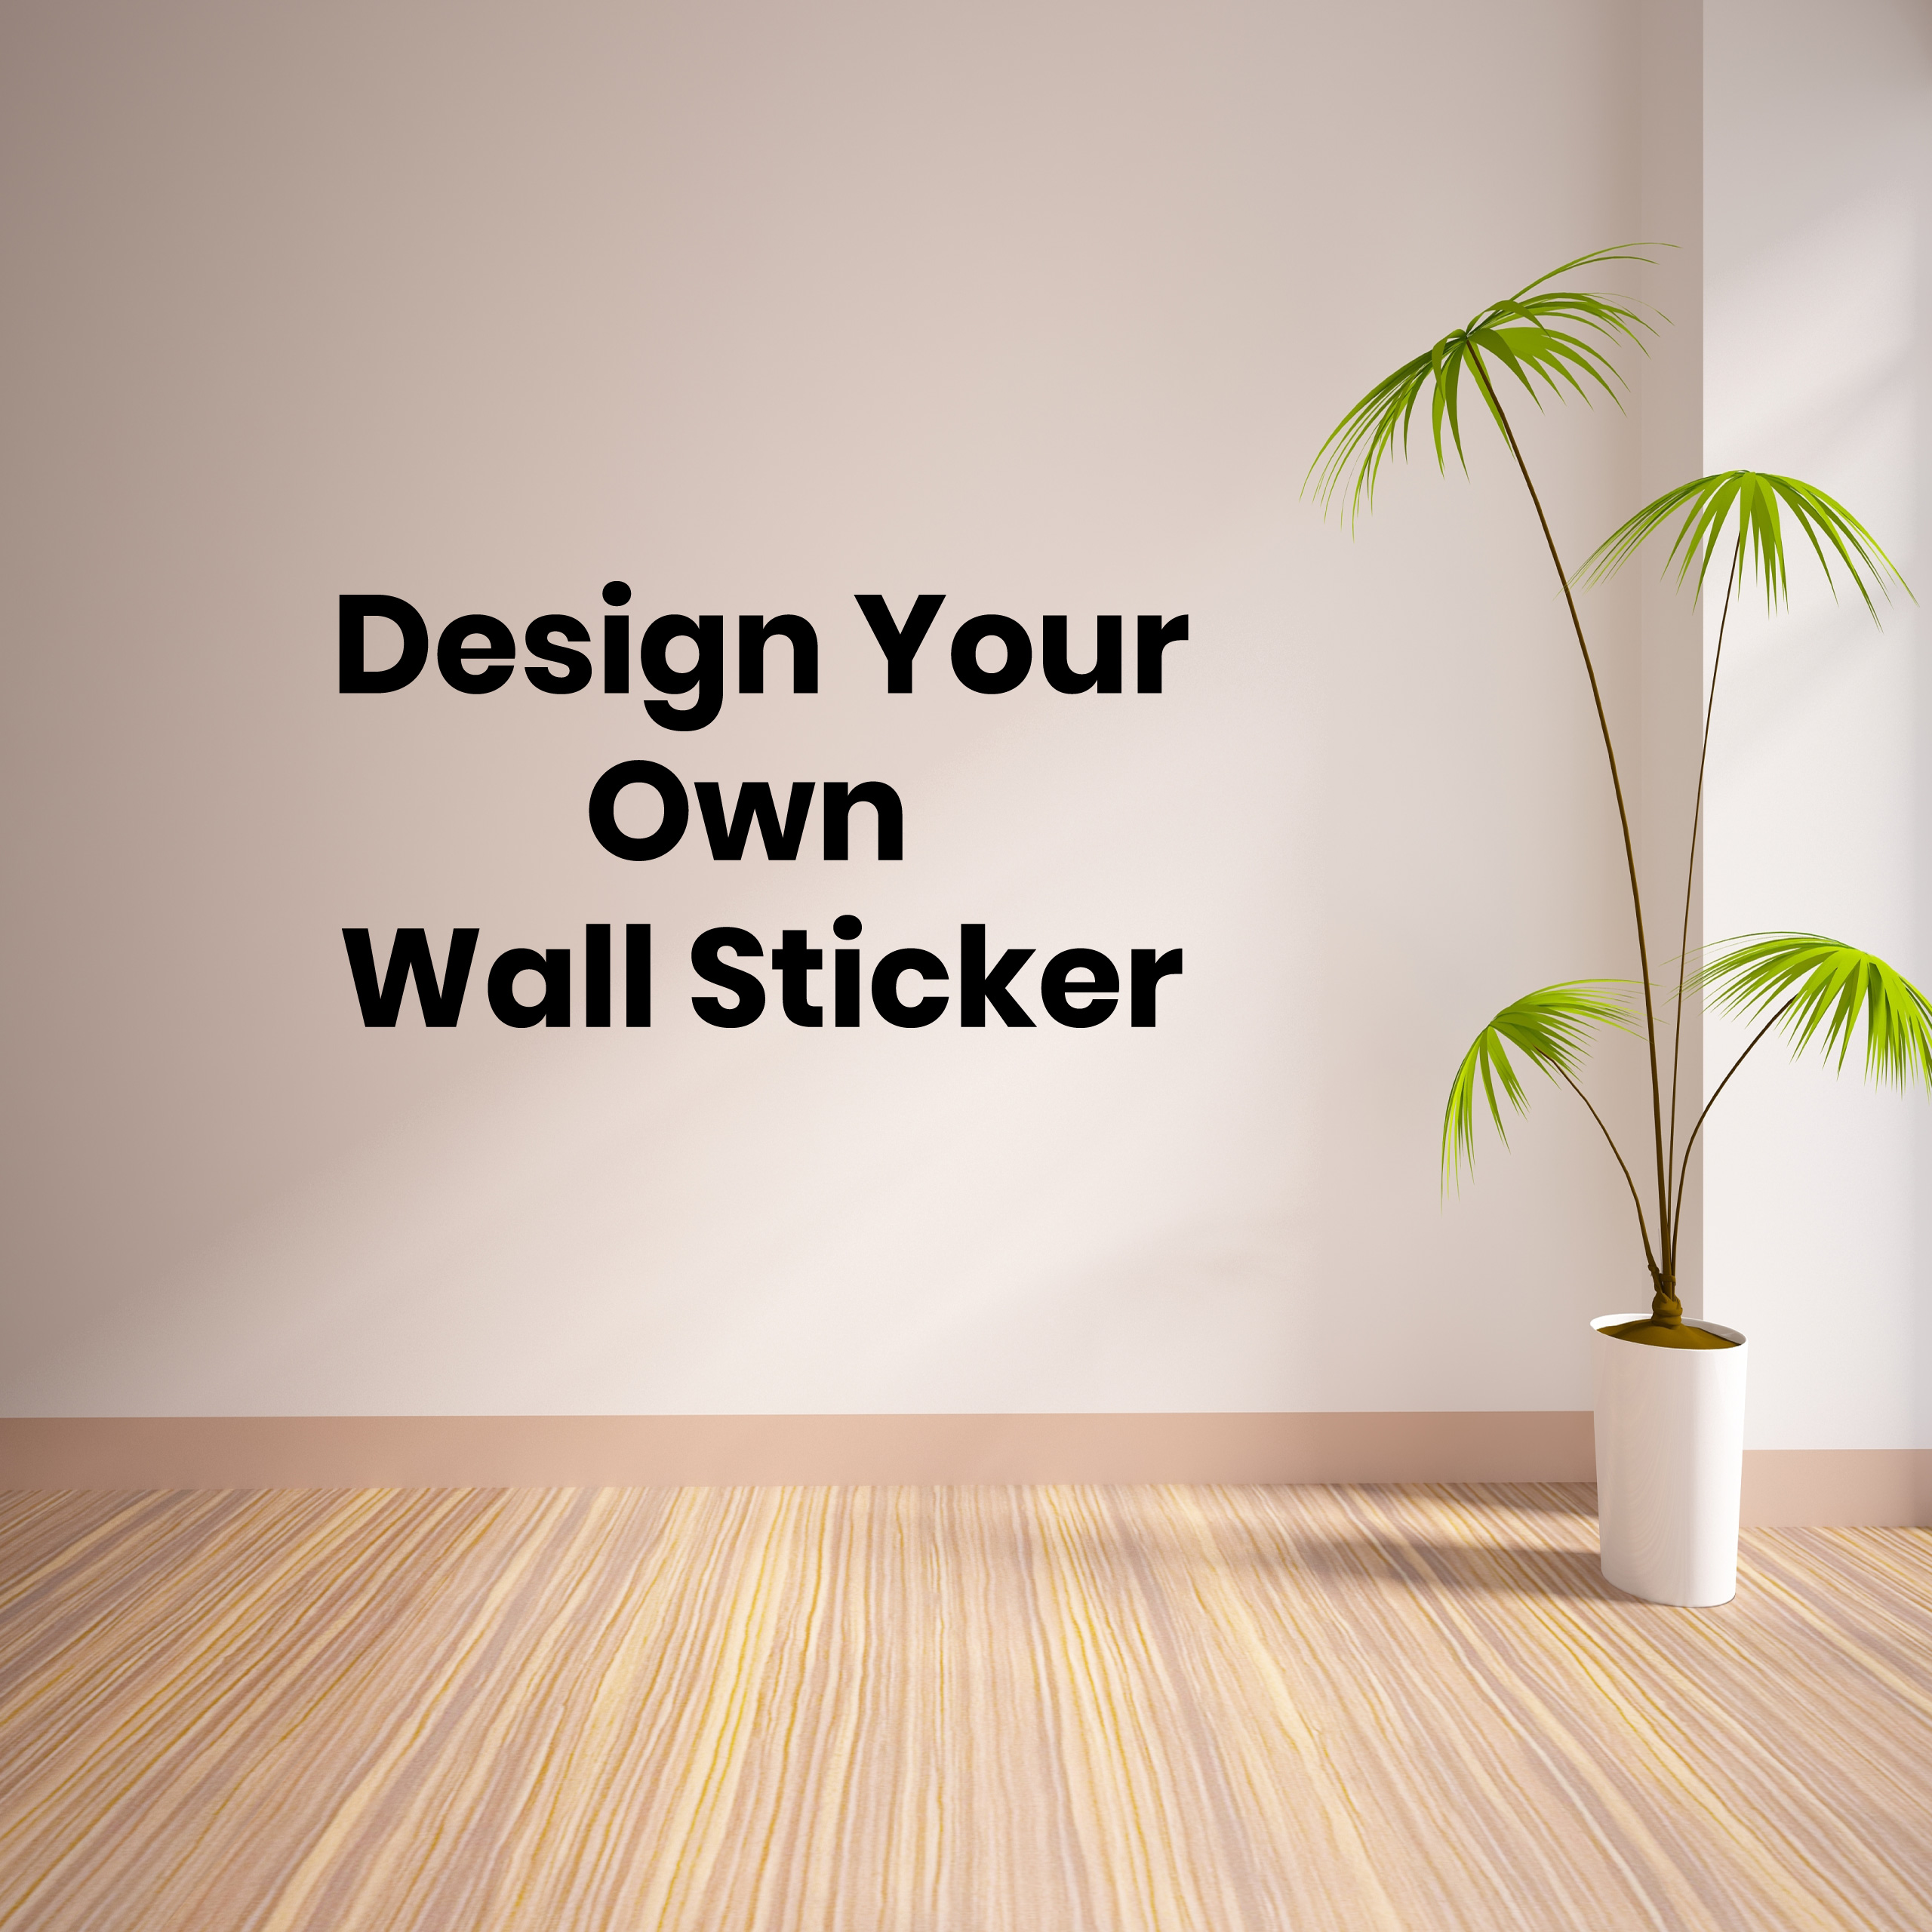 Durable Custom Wall Decals for All Types of Rooms - PrintPlace